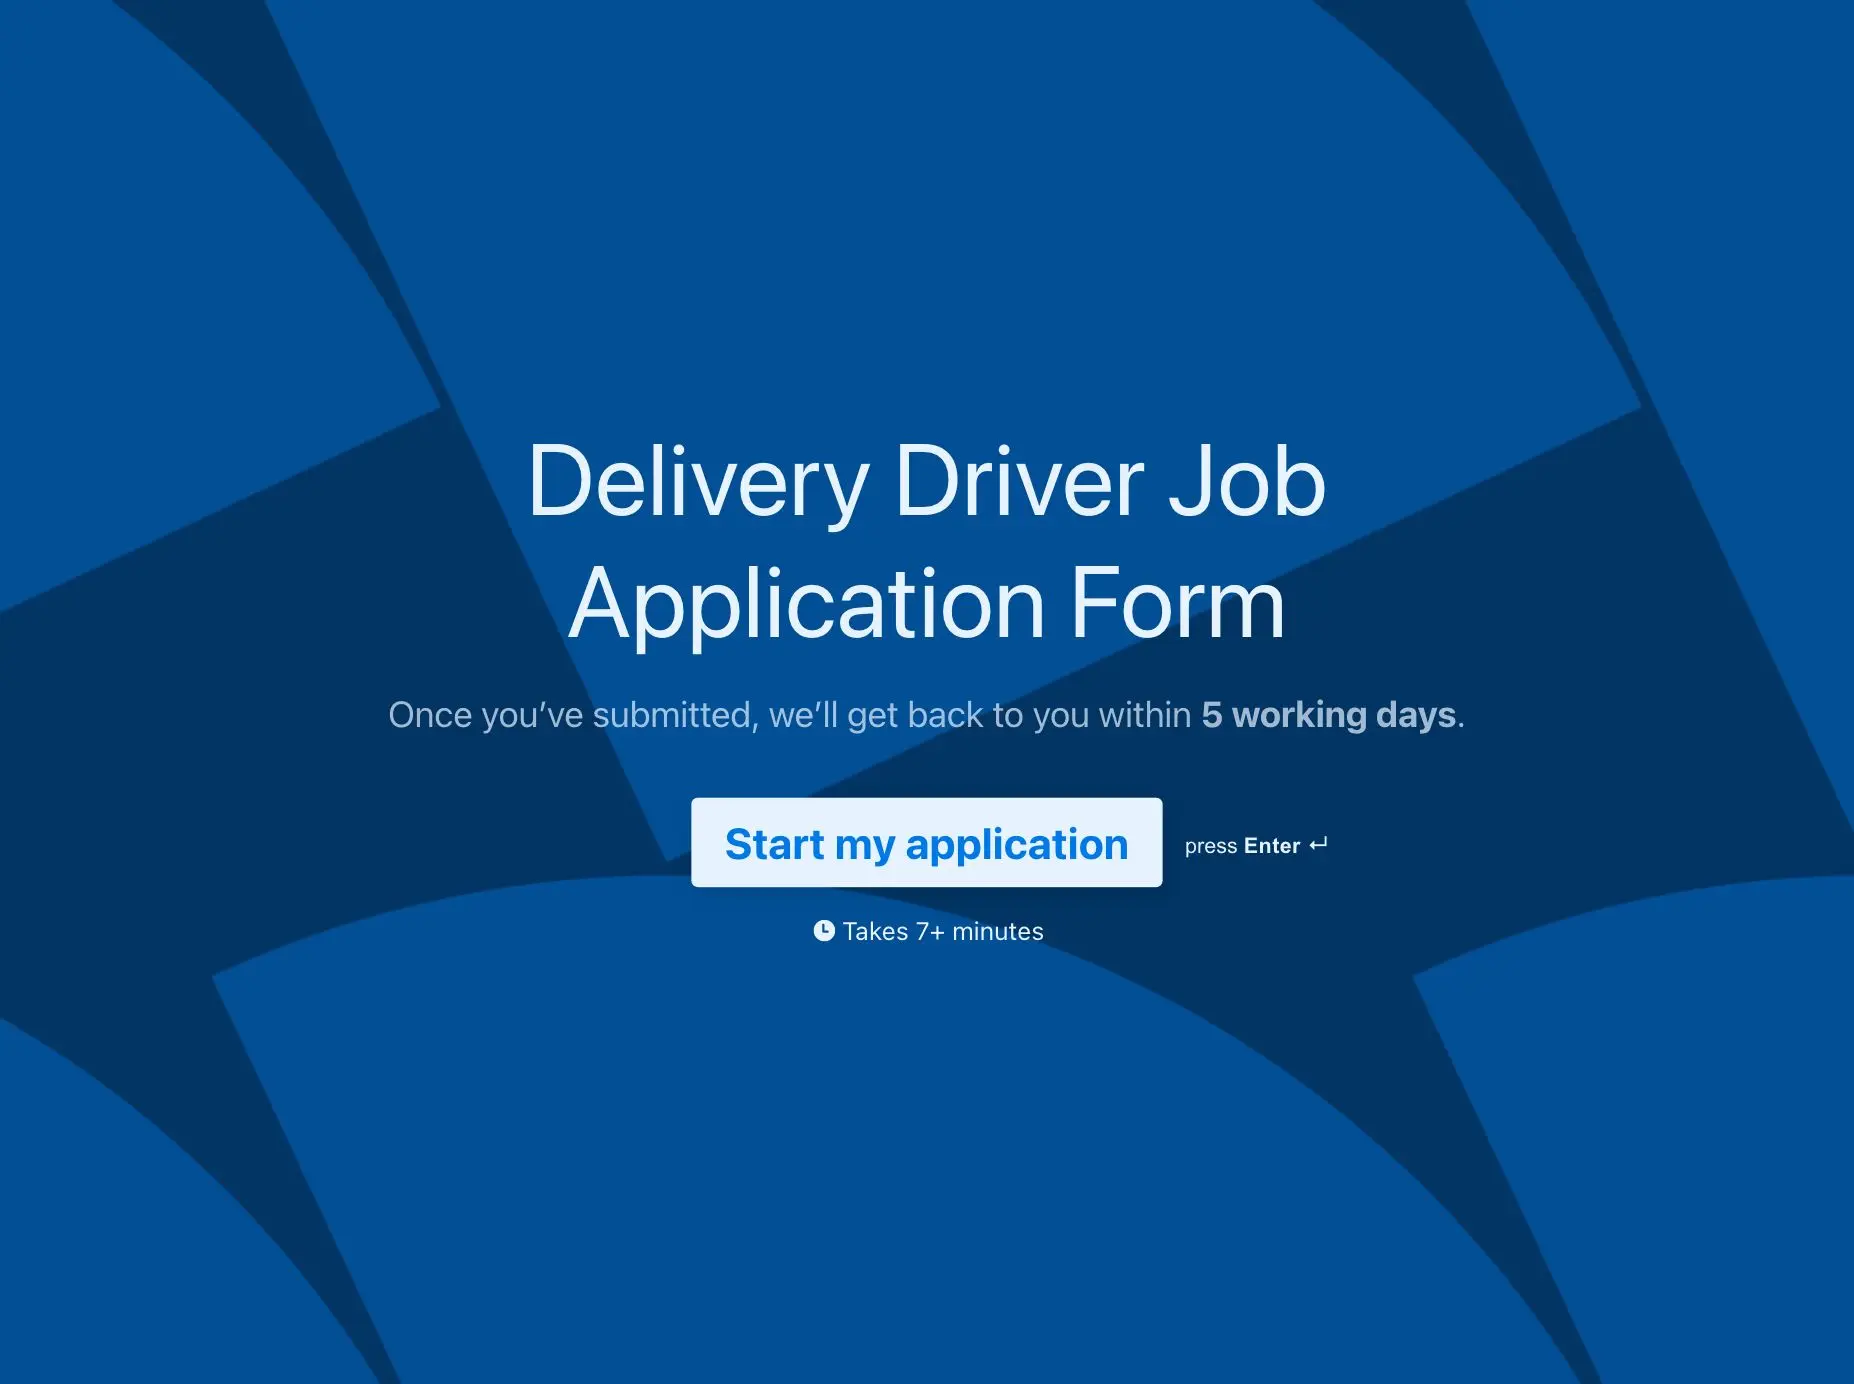 Delivery Driver Job Application Form Template Hero